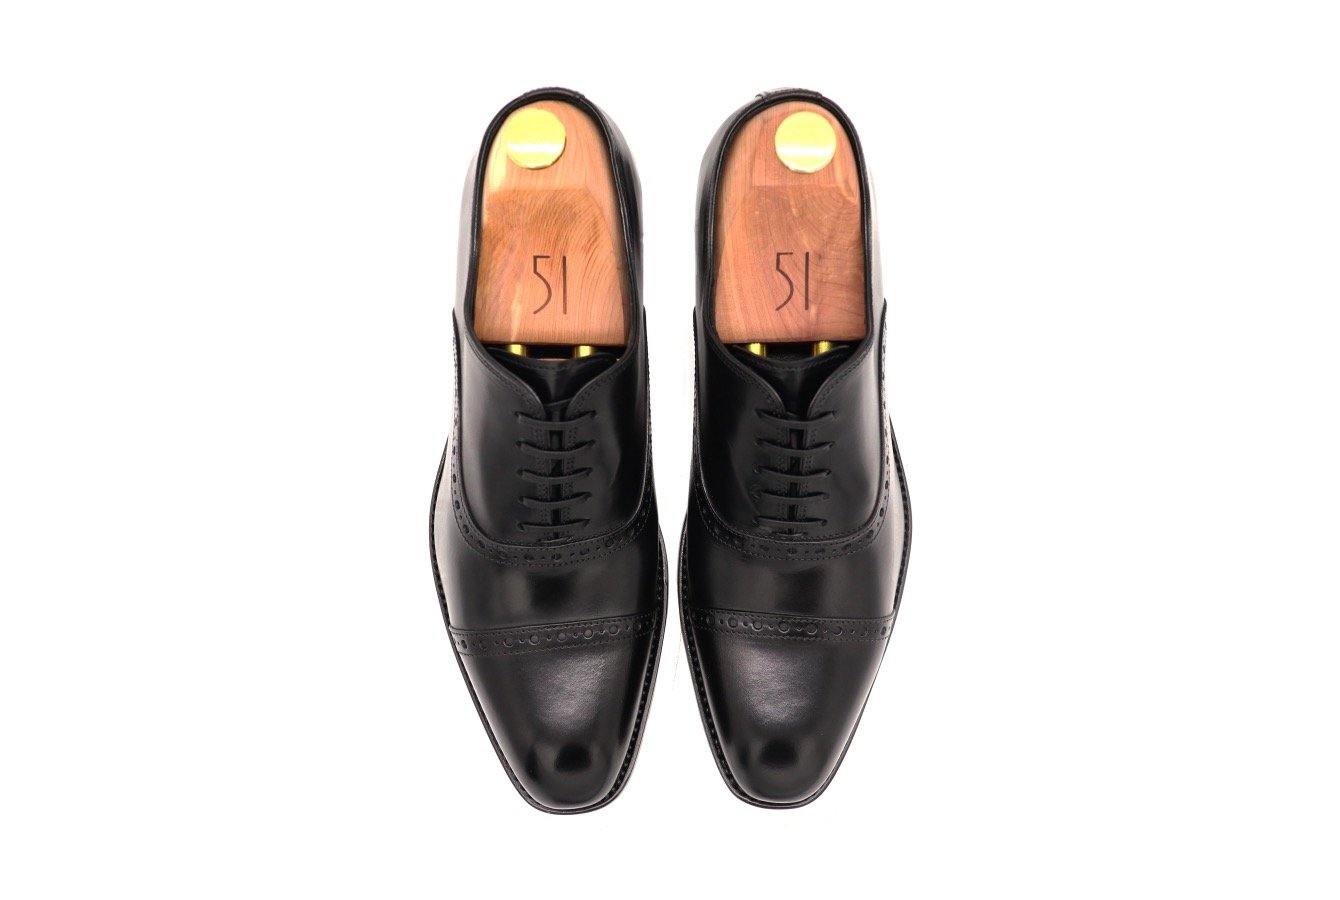 Top View of Mens Black Leather Semi Brogue Oxford Shoes